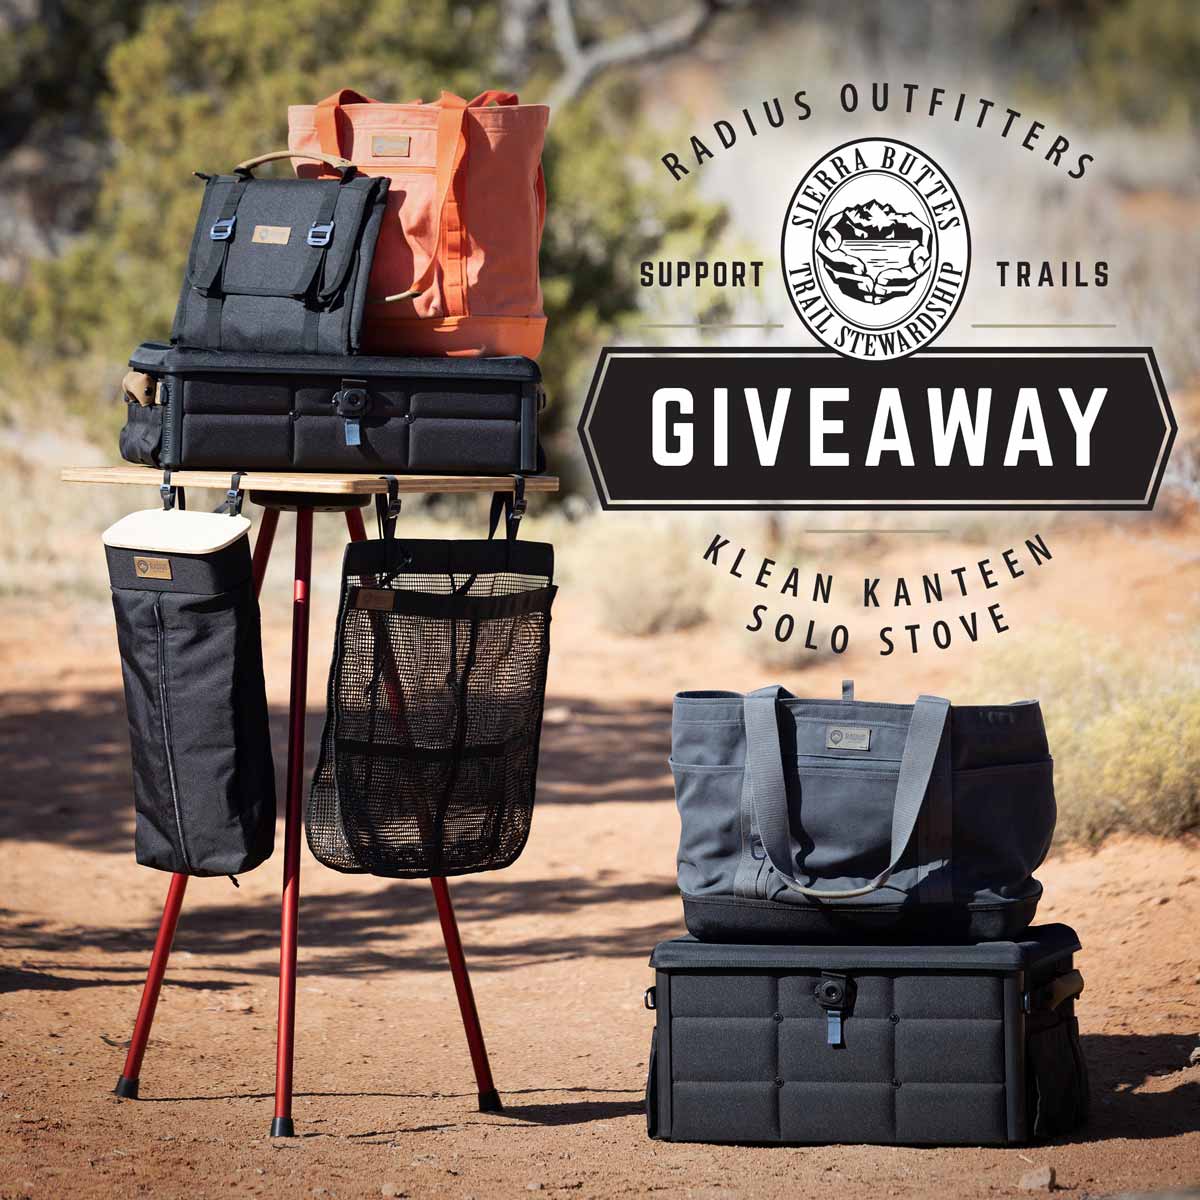 Radius Outfitters Giveaway Klean Kanteen Solo Stove